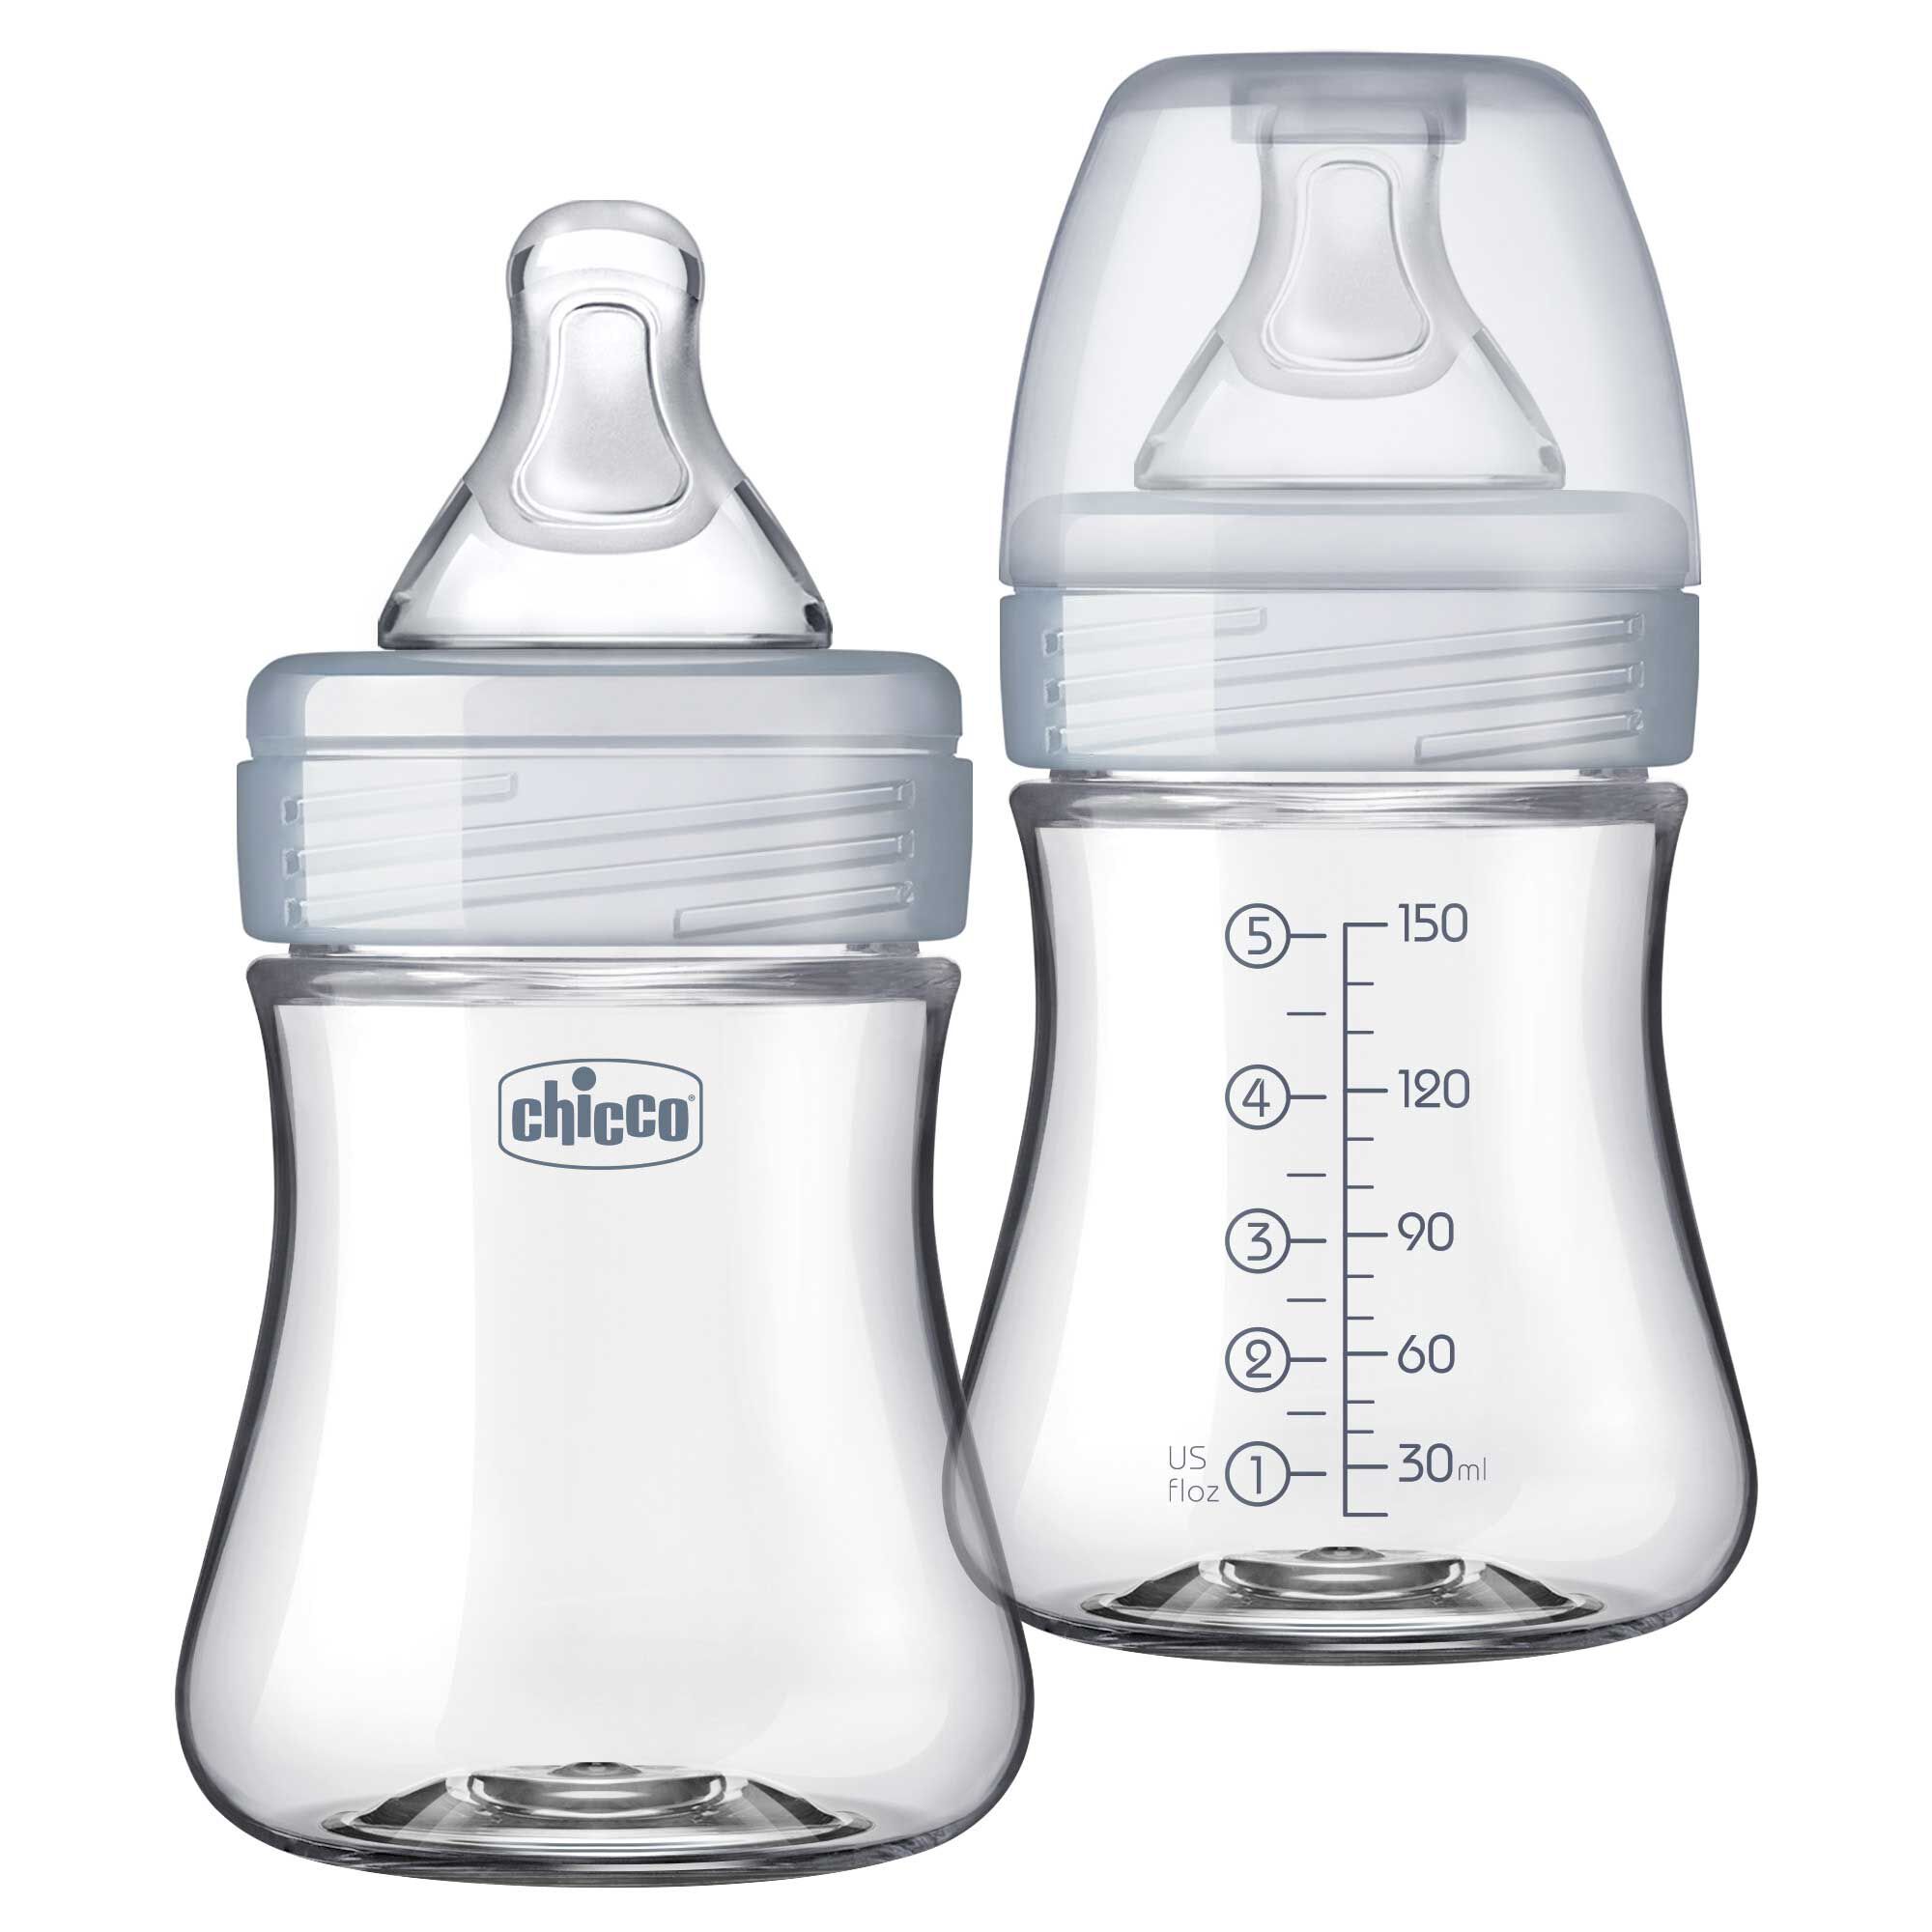 https://www.chiccousa.com/dw/image/v2/AAMT_PRD/on/demandware.static/-/Sites-chicco_catalog/default/dw825fe0c7/images/products/feeding/duo-bottle/chicco-duo-bottle-5oz-neutral-2pk.jpg?sw=2000&sh=2000&sm=fit